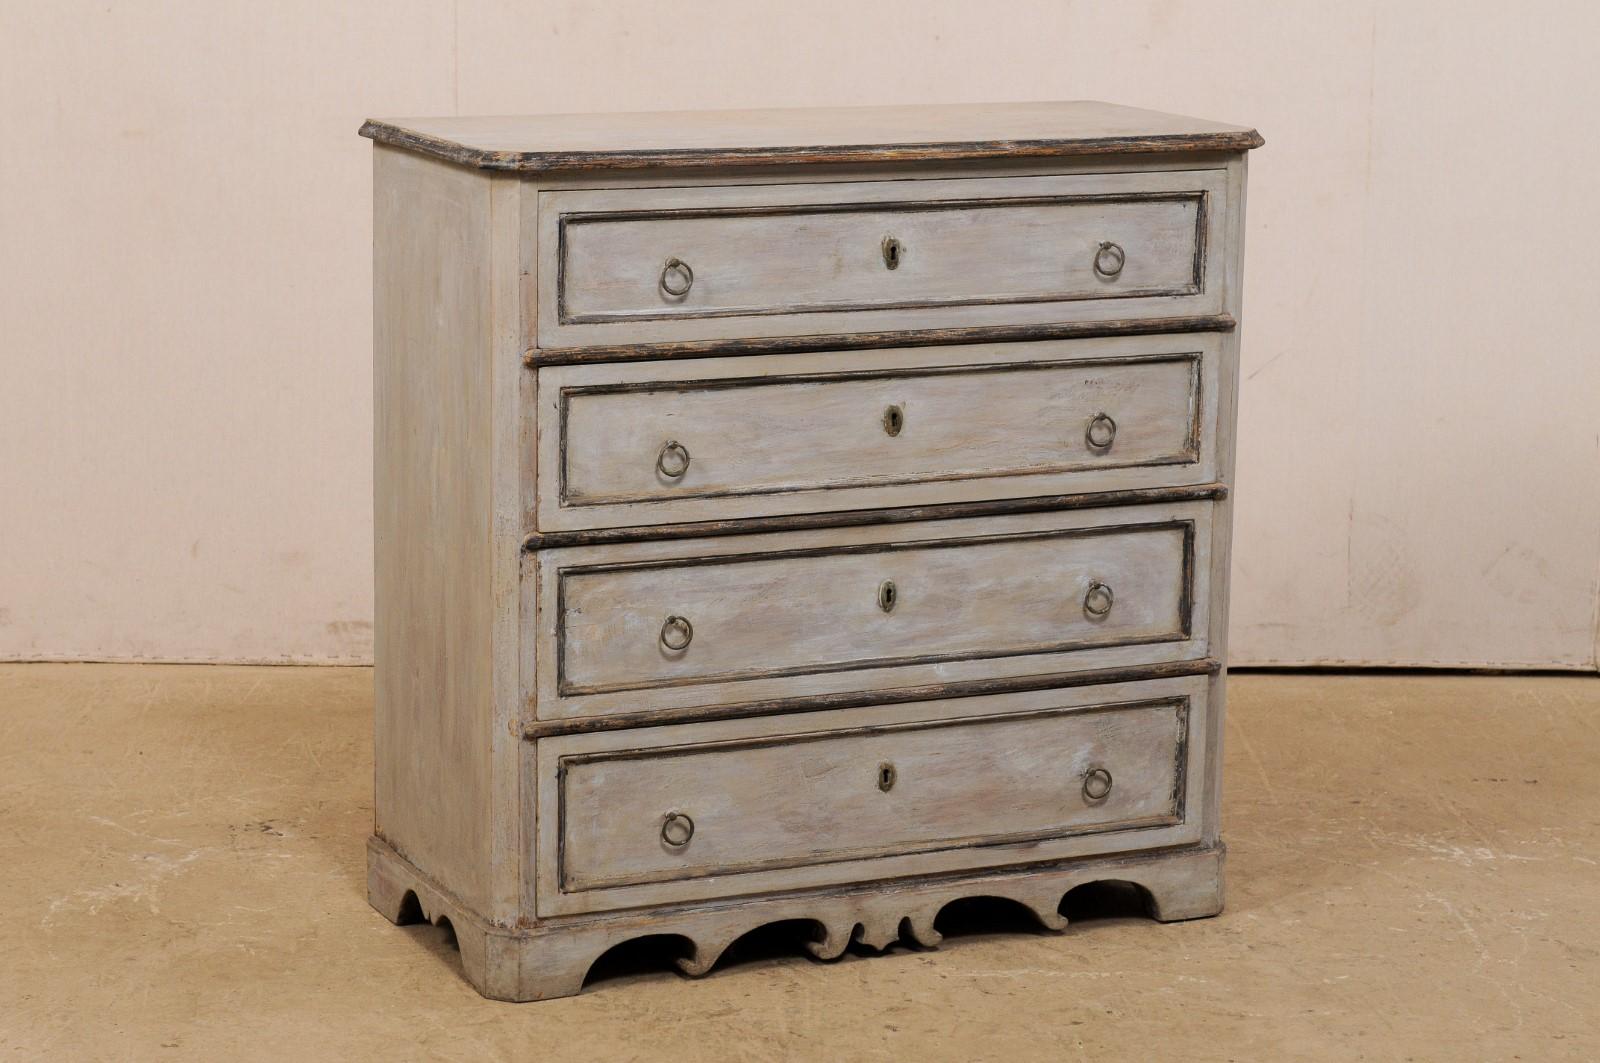 A Swedish painted wood chest of four drawers from the mid-19th century. This antique Karl Johan chest, circa 1850, features a slightly overhanging top with rounded front corners, with a case beneath which houses four dovetailed drawers, each adorn